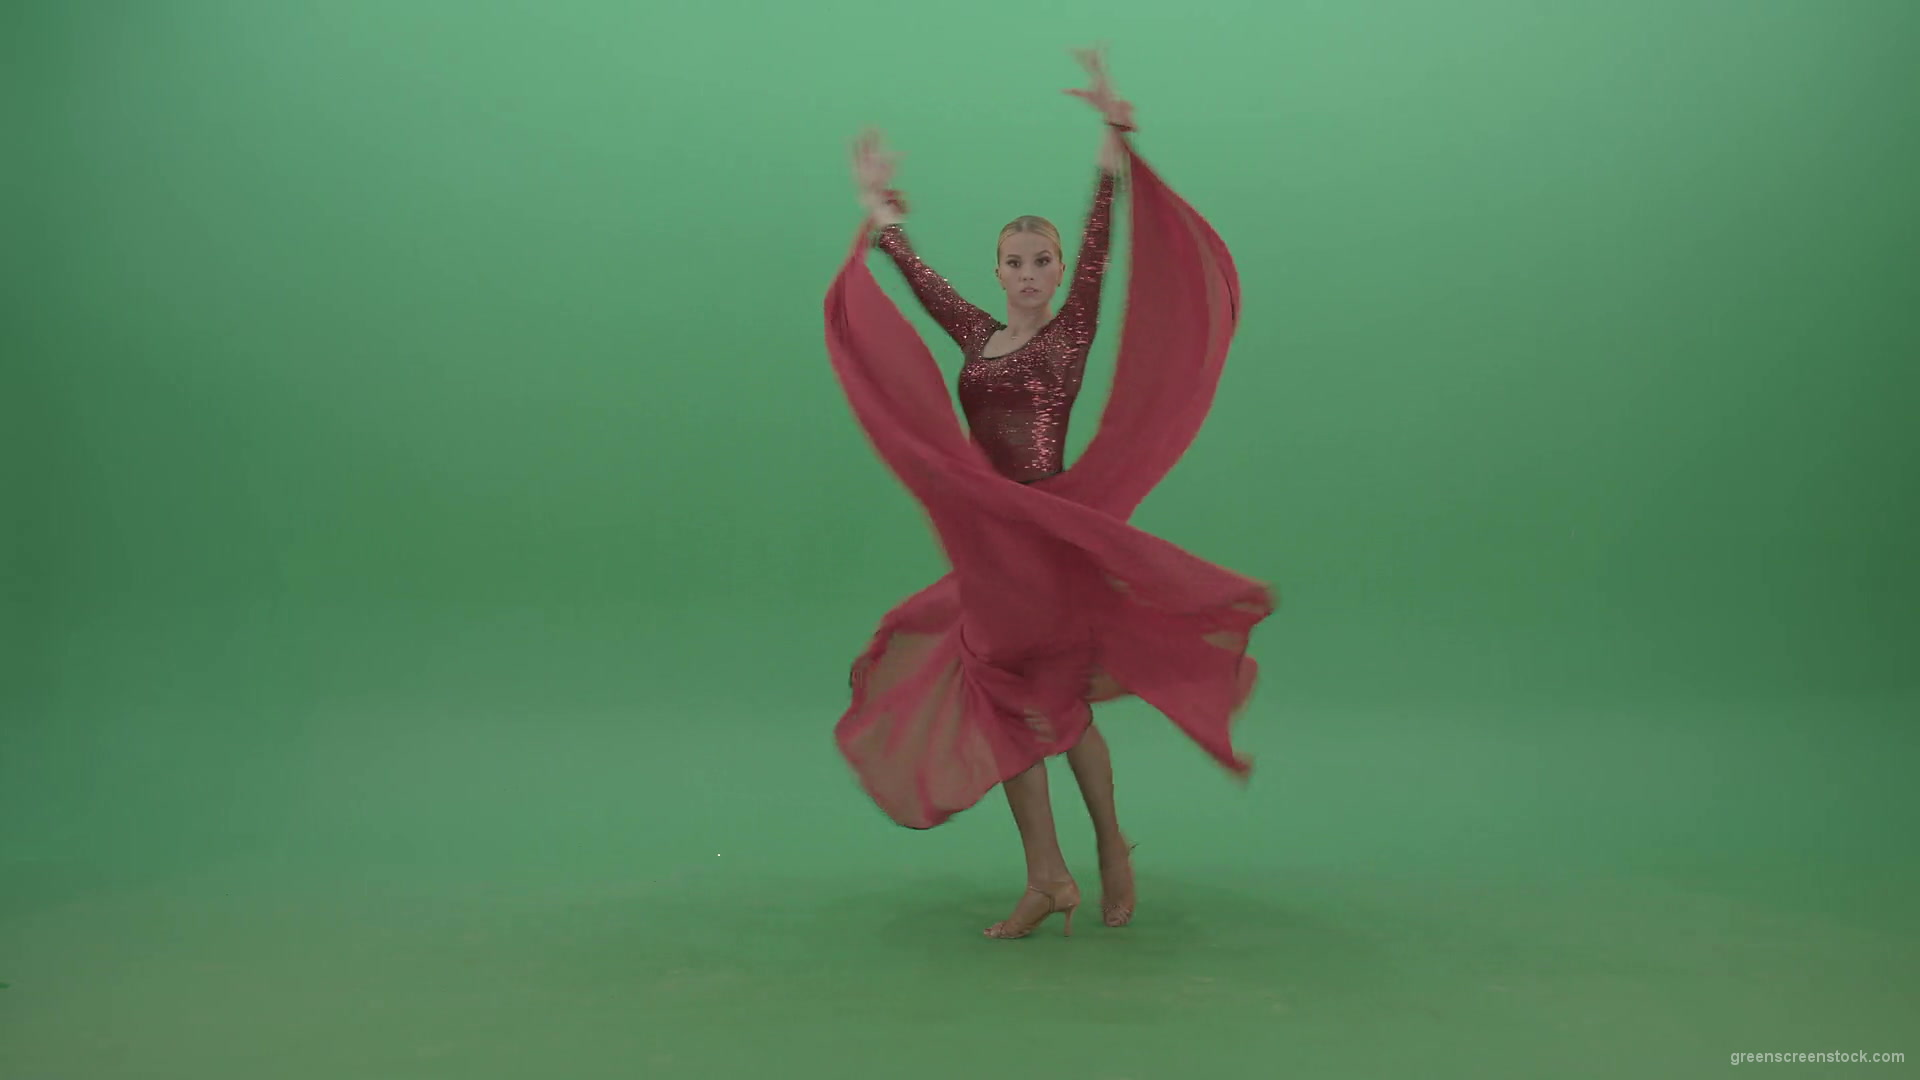 Passion-elegant-girl-in-red-dress-dancing-flamenco-isolated-on-green-screen-4K-Video-Footage-1920_005 Green Screen Stock